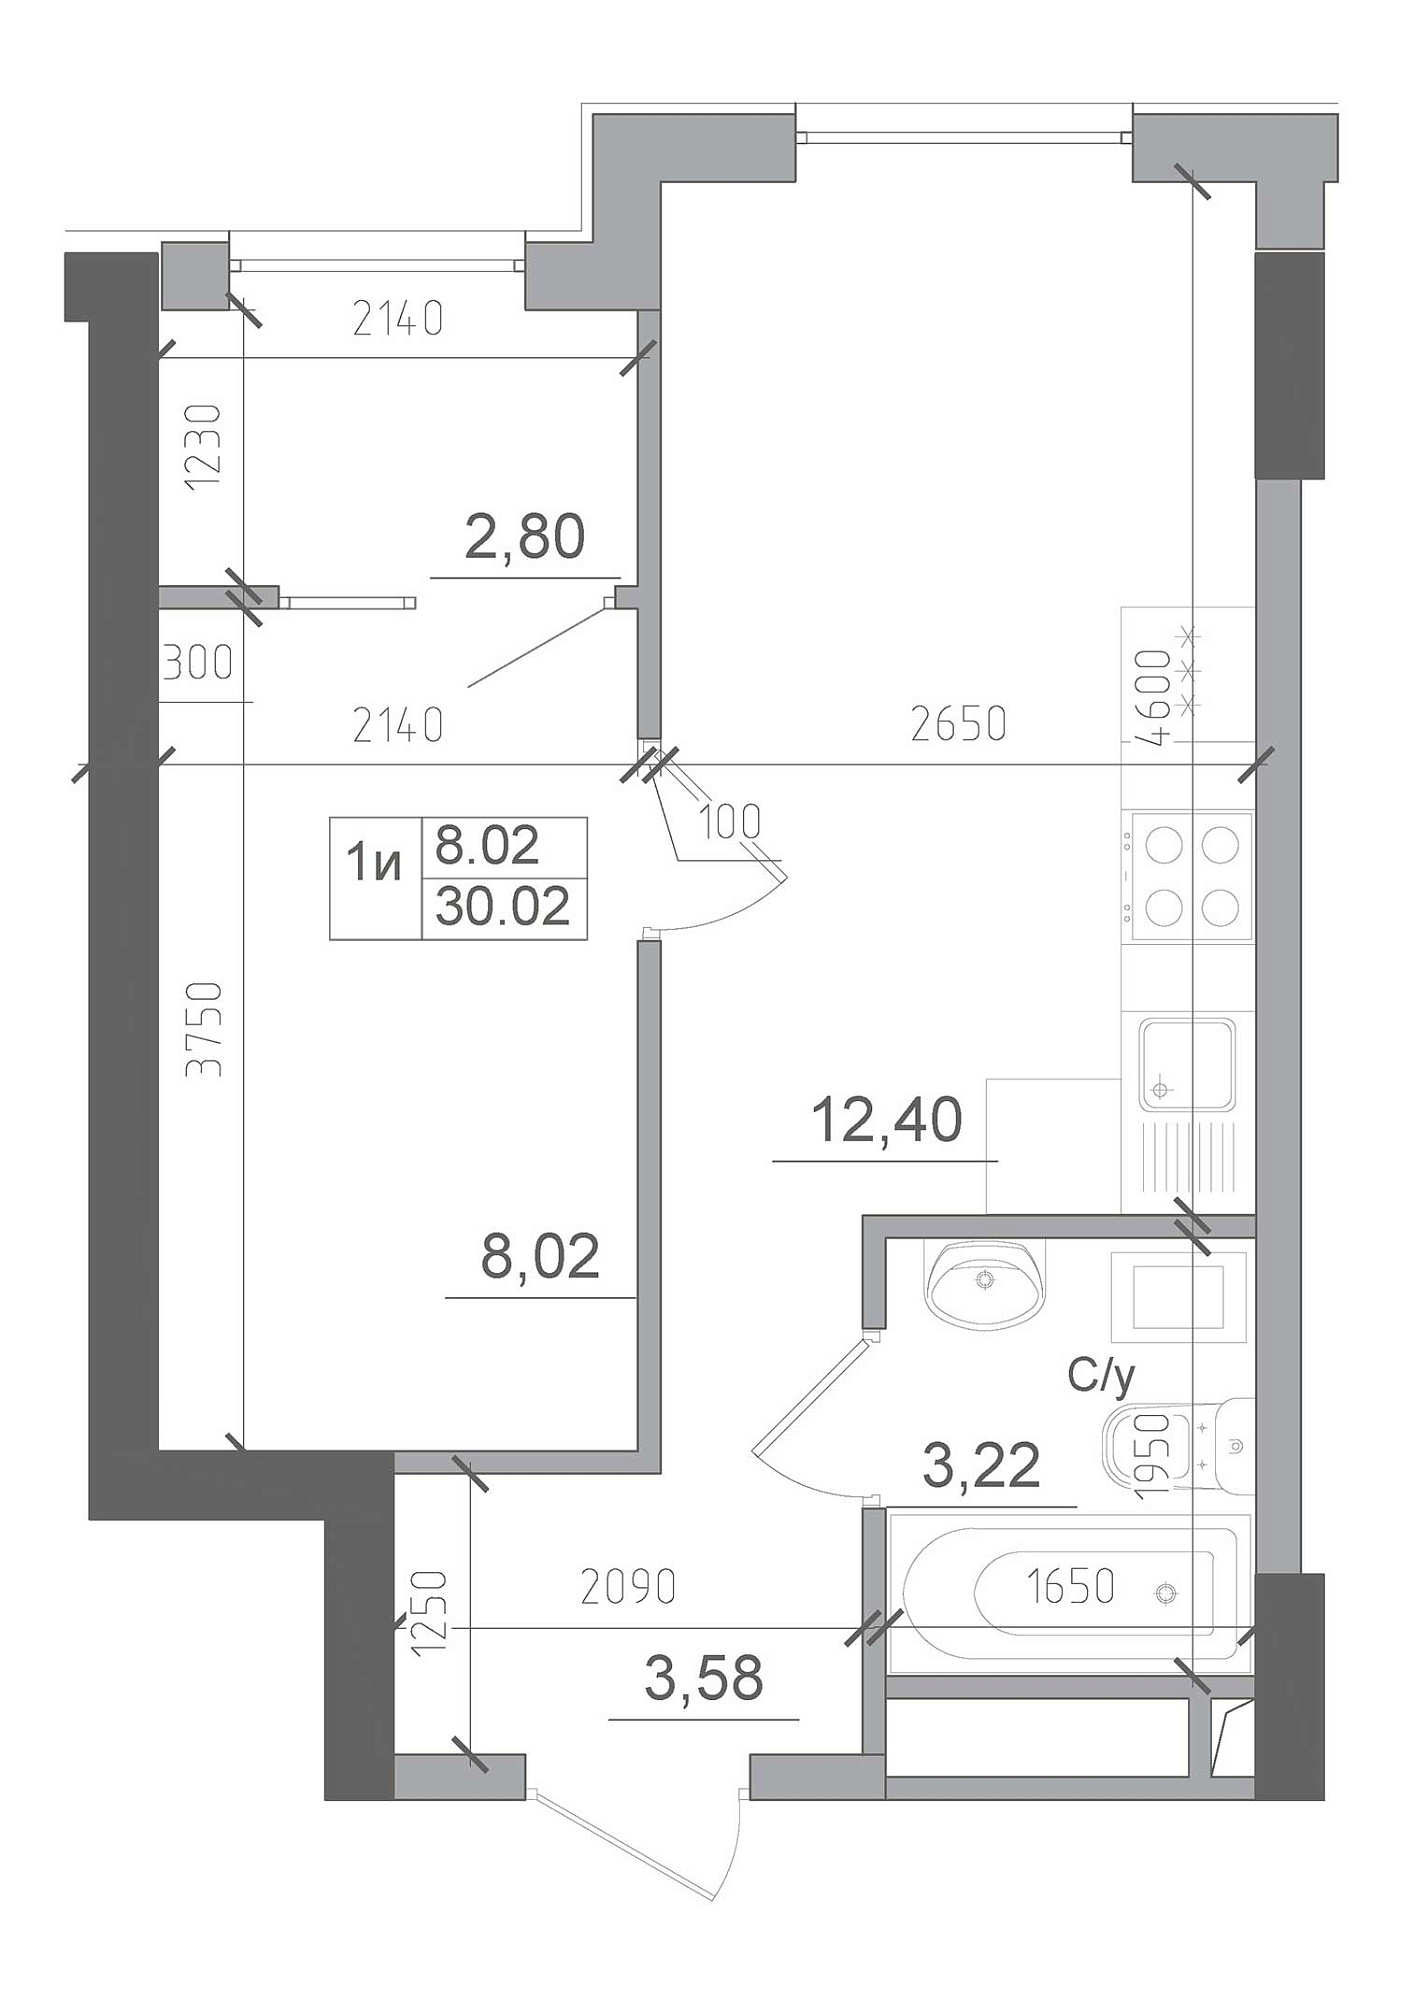 Planning 1-rm flats area 30.02m2, AB-22-05/00014.